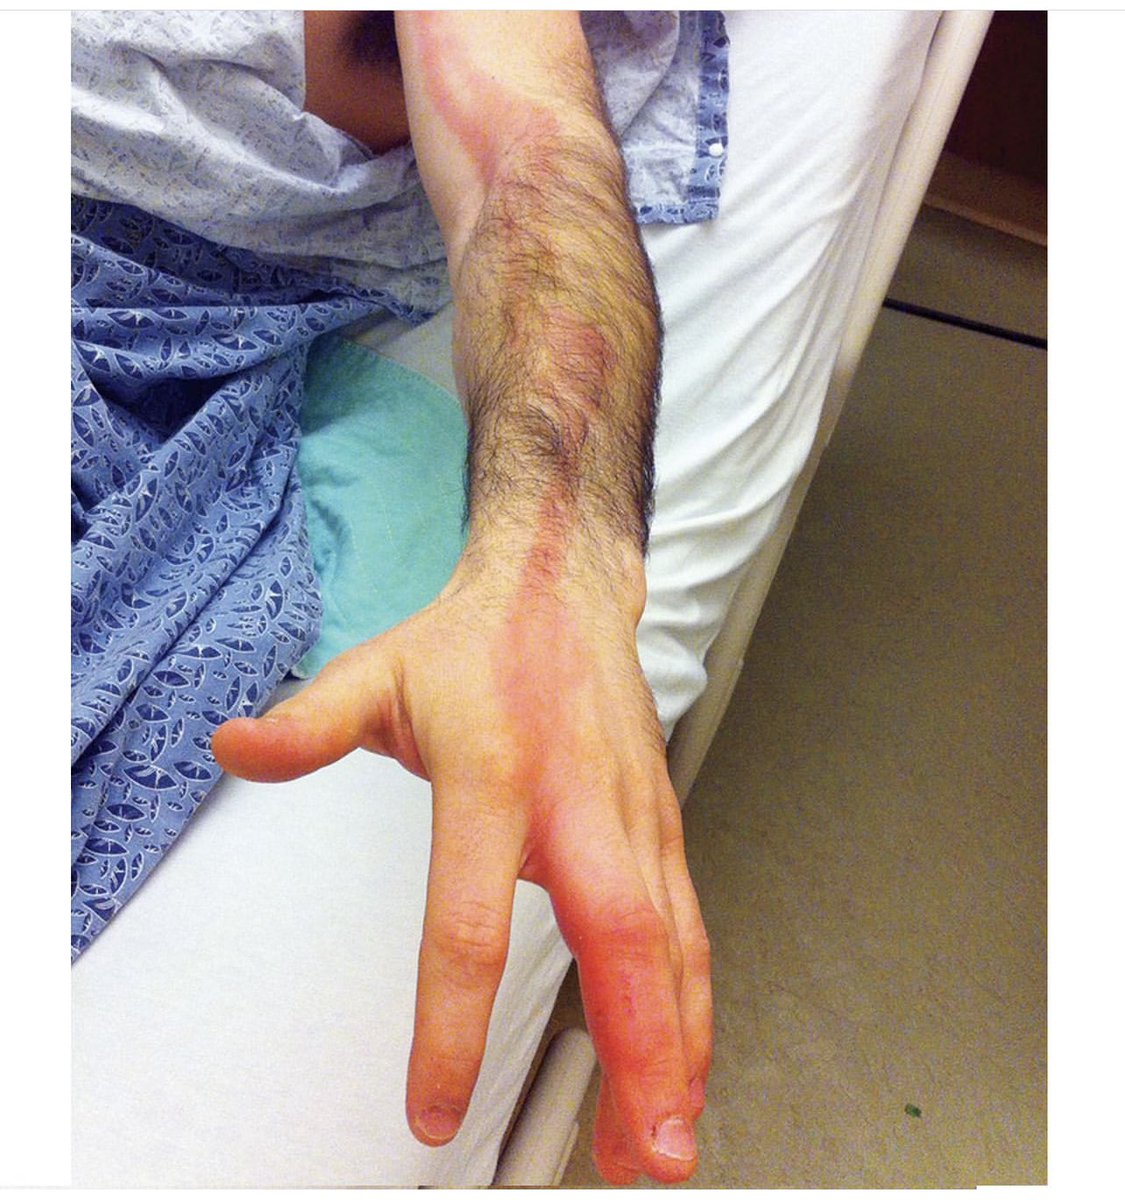 #Climical_Case🦠

A 23-year-old man presents with progressive left arm pain and erythema following an injury to his left third finger during a lacrosse game. 

What's the likely #diagnosis? 

#MedTwitter #Orthopedics #SportsMedicine'